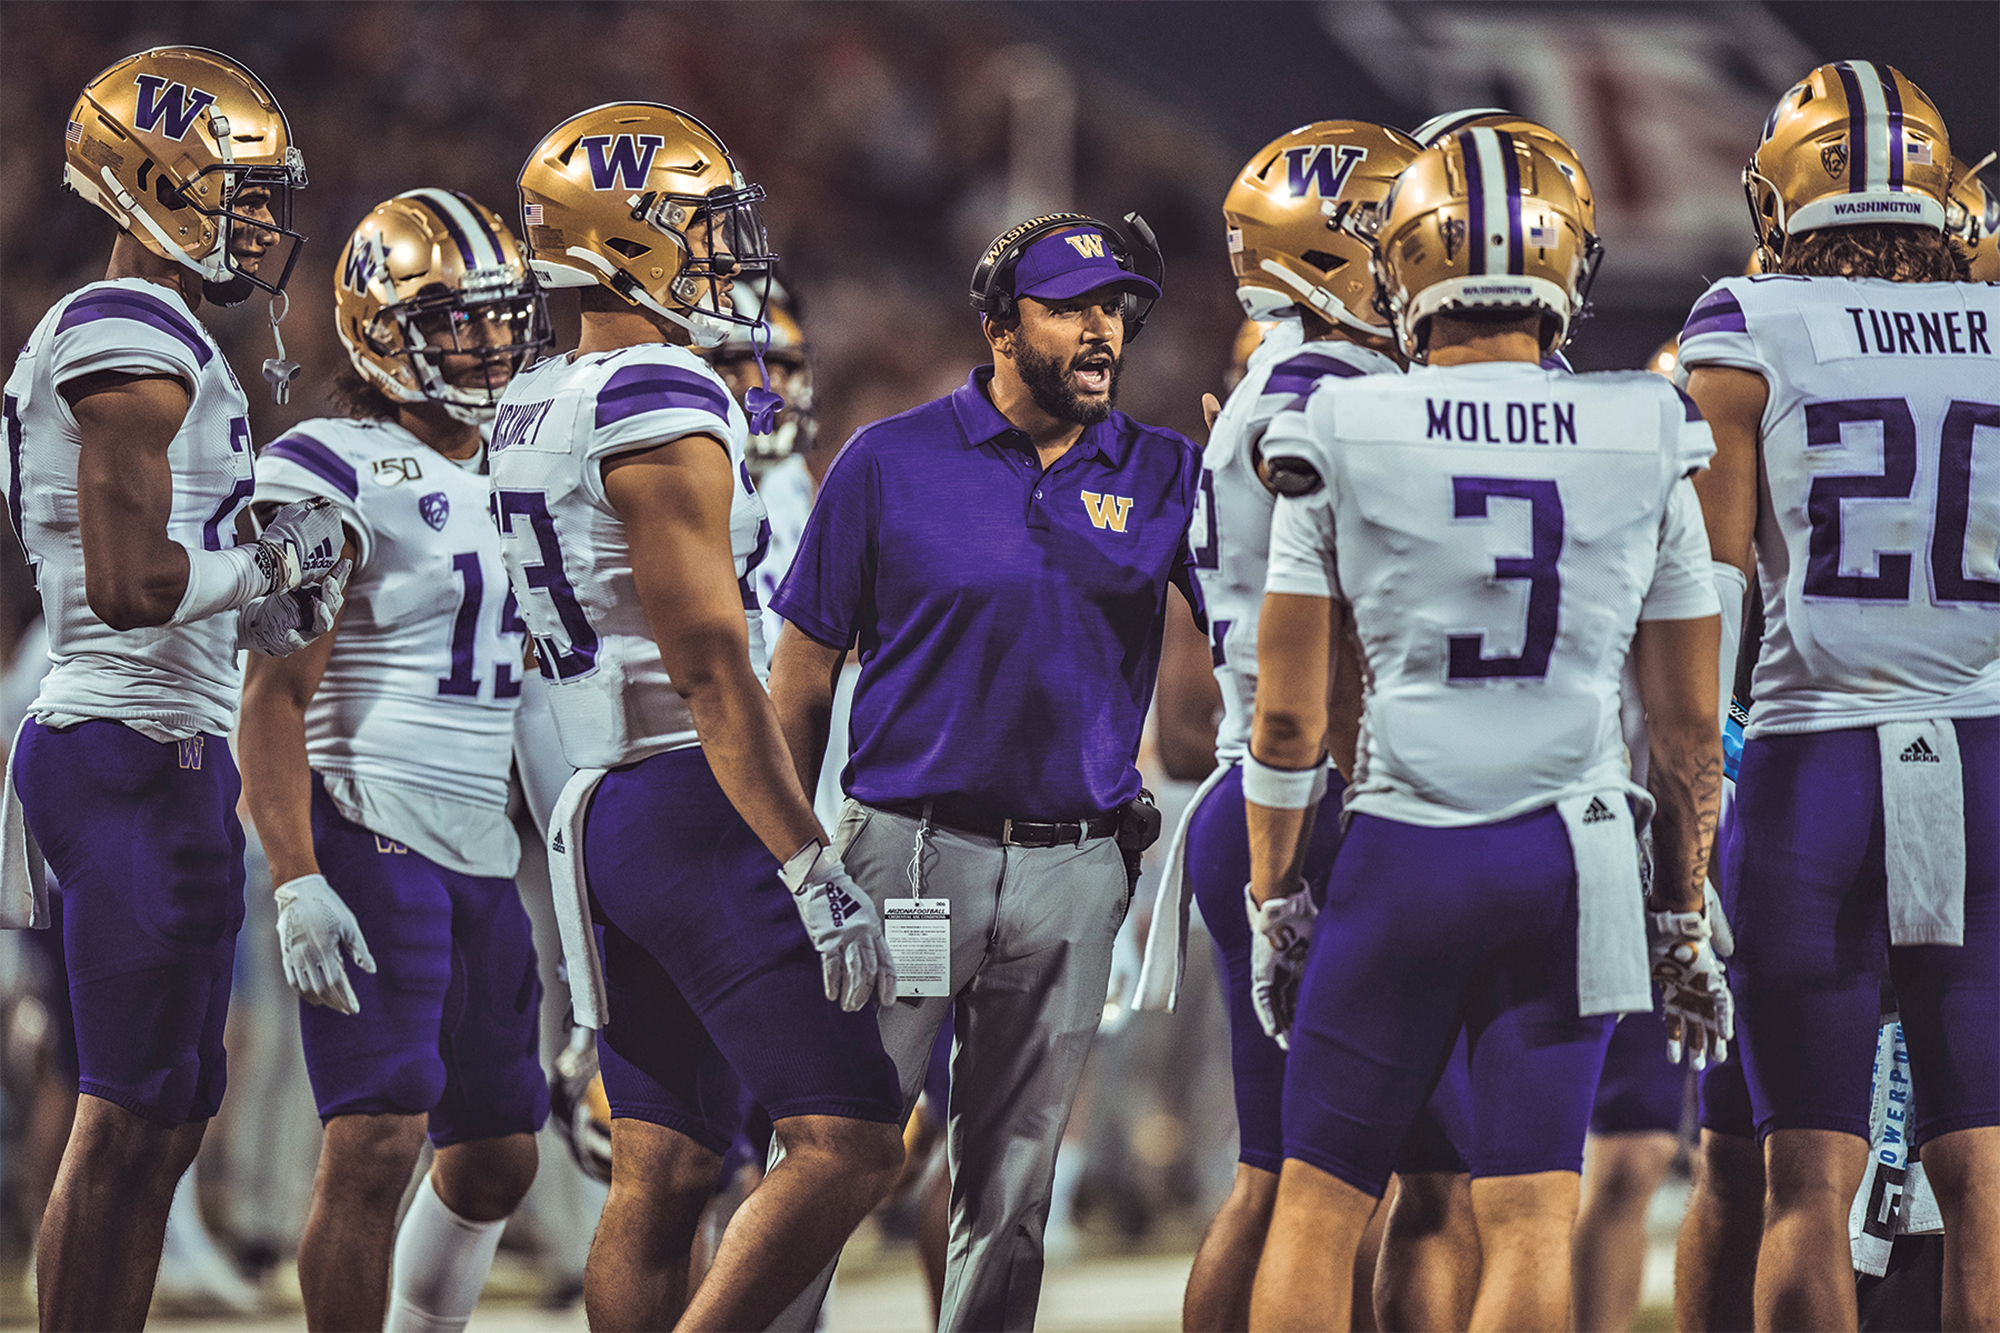 For Jimmy Lake, coaching Husky football is a dream come true UW